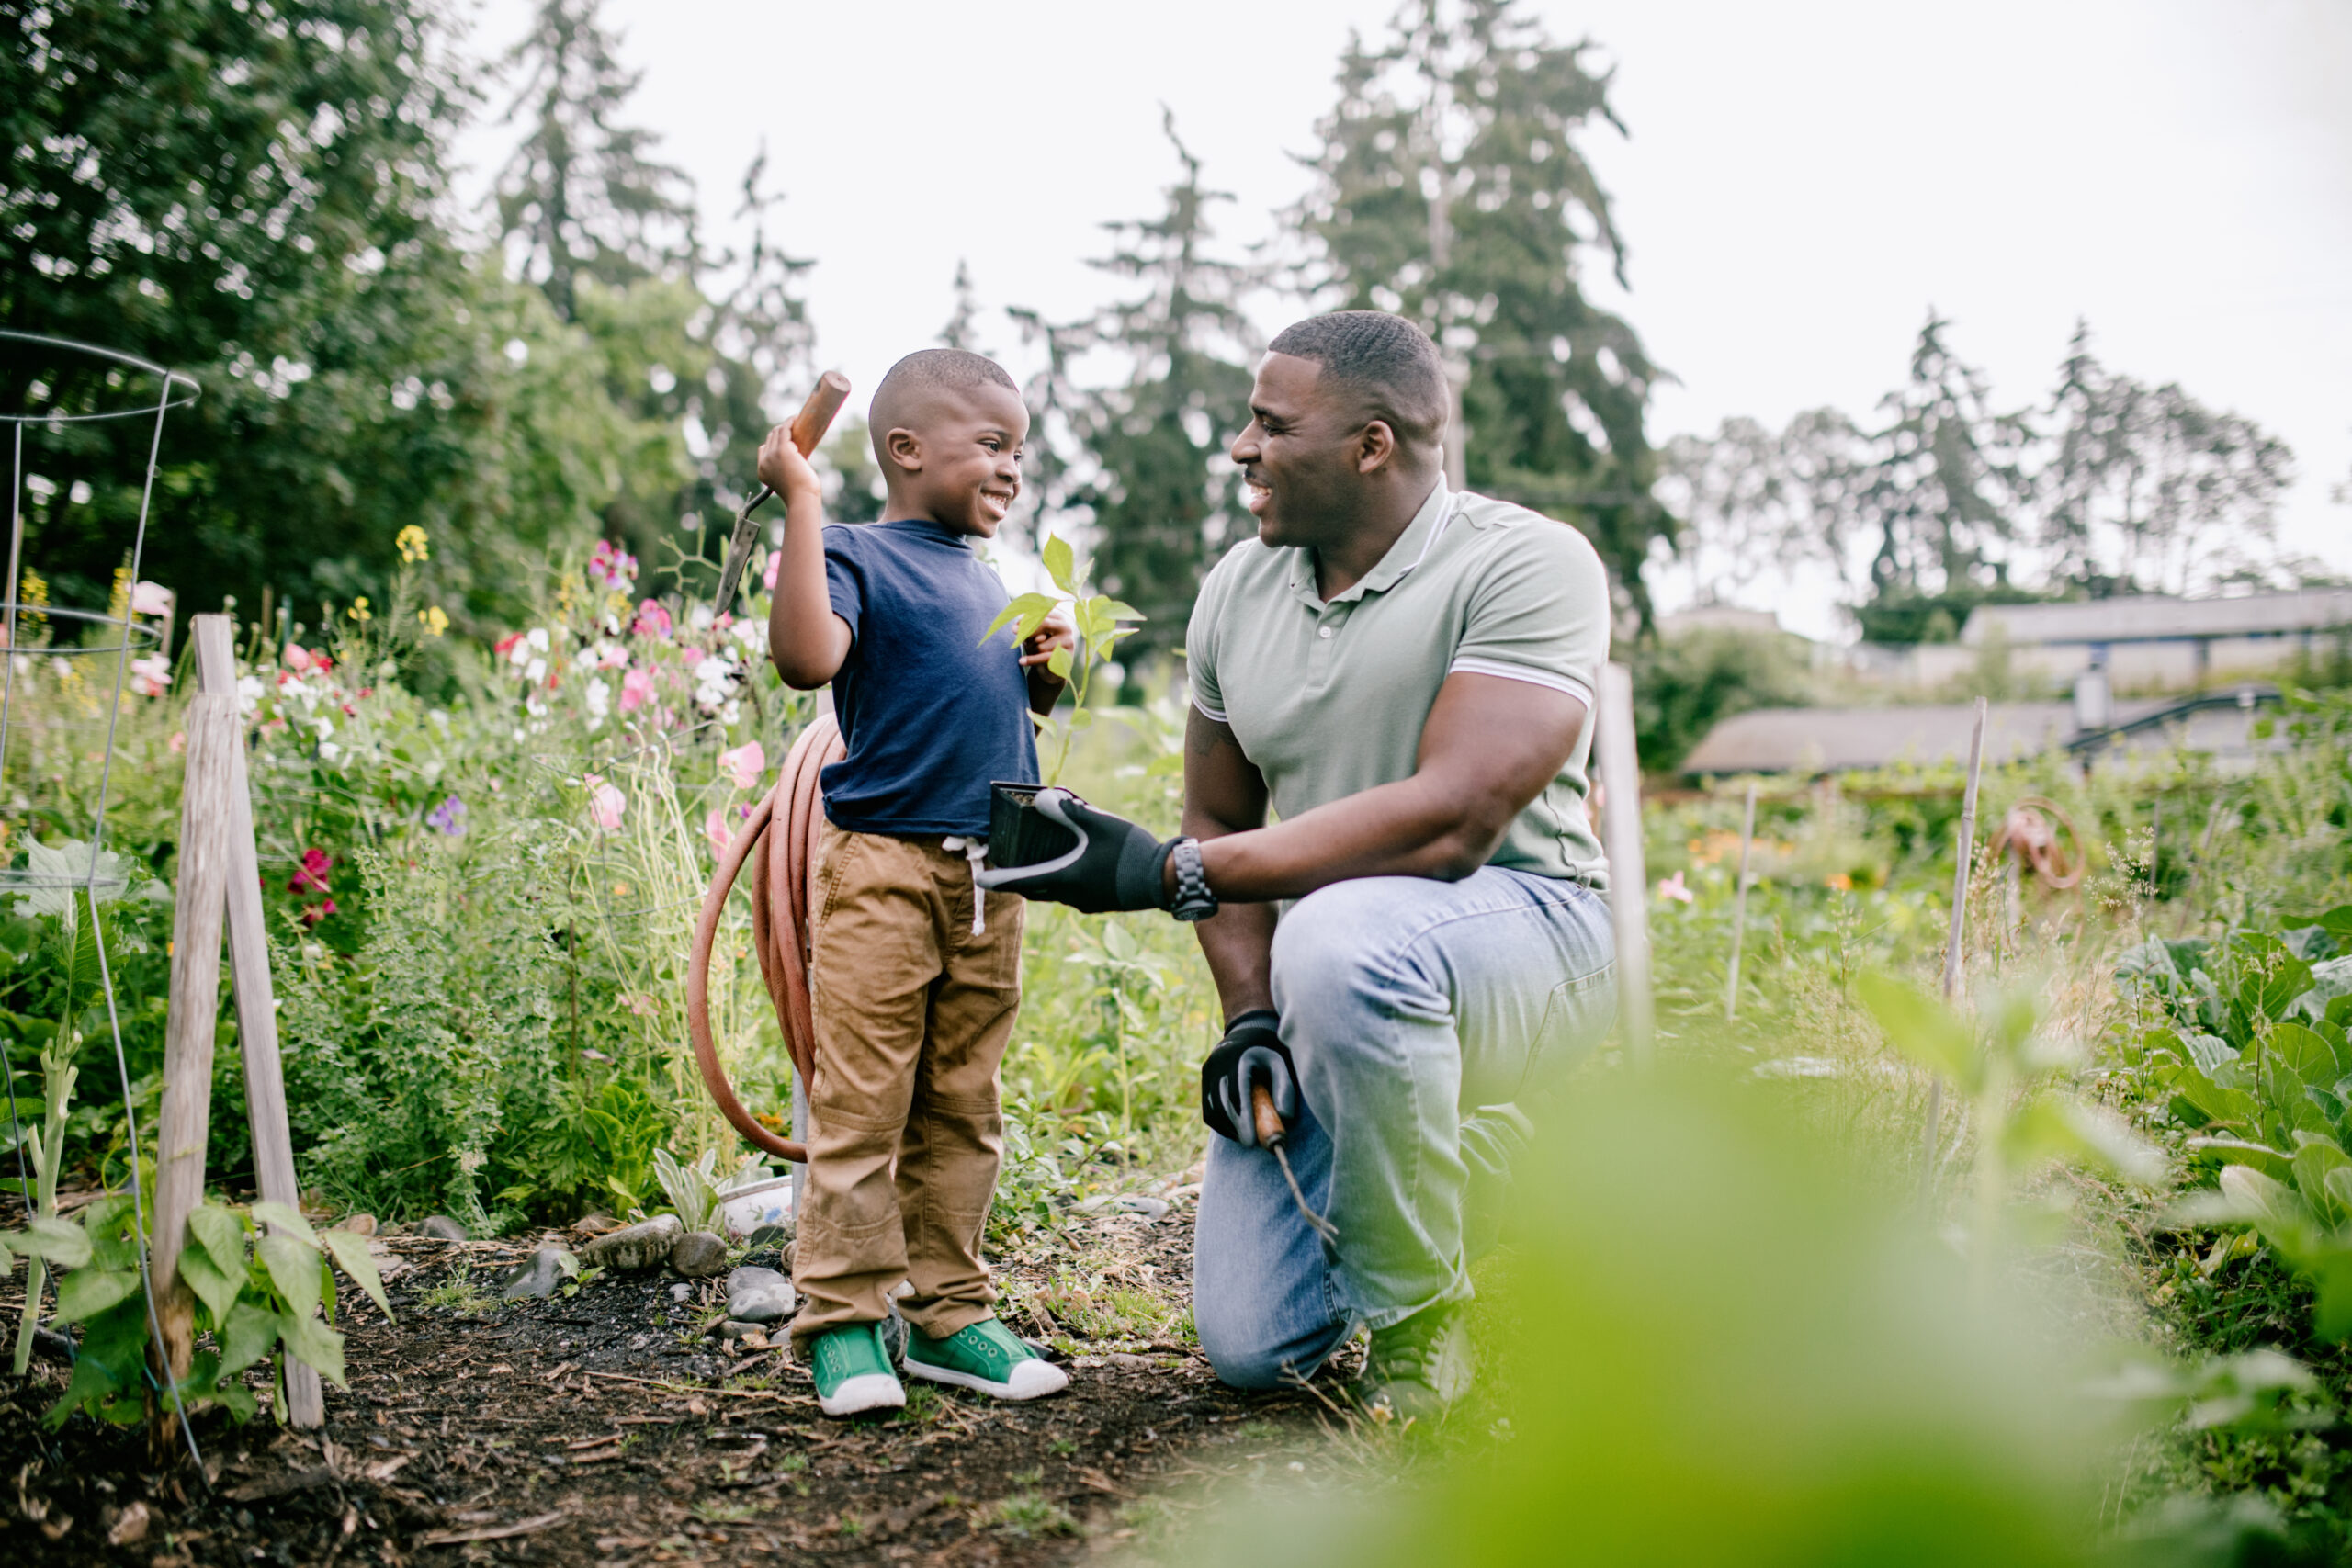 An African American father teaches his son about caring for the earth in a community vegetable garden. A time of relationship building and education.